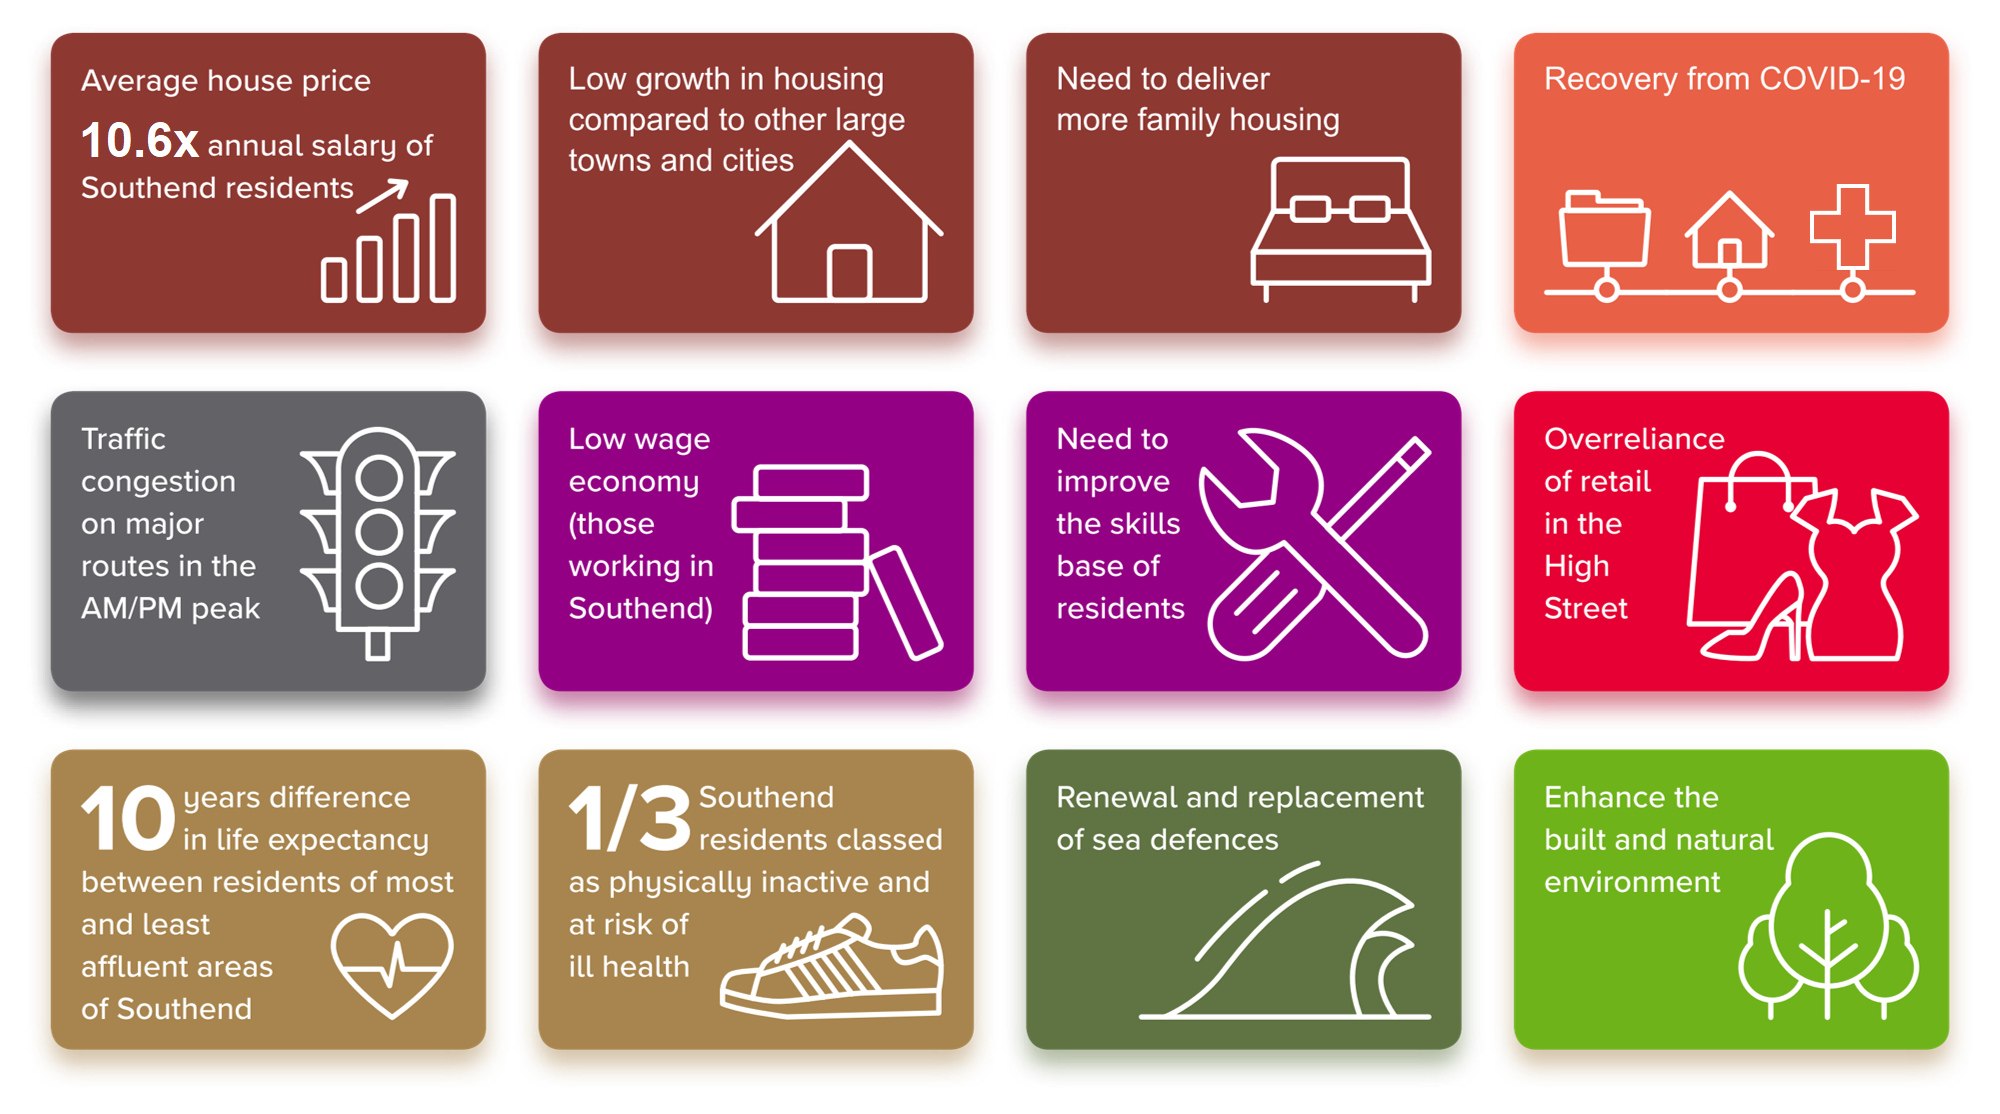 Southend Challenges Infographic: whole page of infographics showing challenges for Southend including recovery from covid-19; high average house prices compared with wages, low housing growth, need for more family housing, health inequalities and a third of Southenders classified as physically inactive and at risk of ill health; need to improve skills base of residents and tackle low wage economy and diversify land uses in Southend High Street; tackle traffic congestion, renew sea defences, and enhance the built and natural environment.